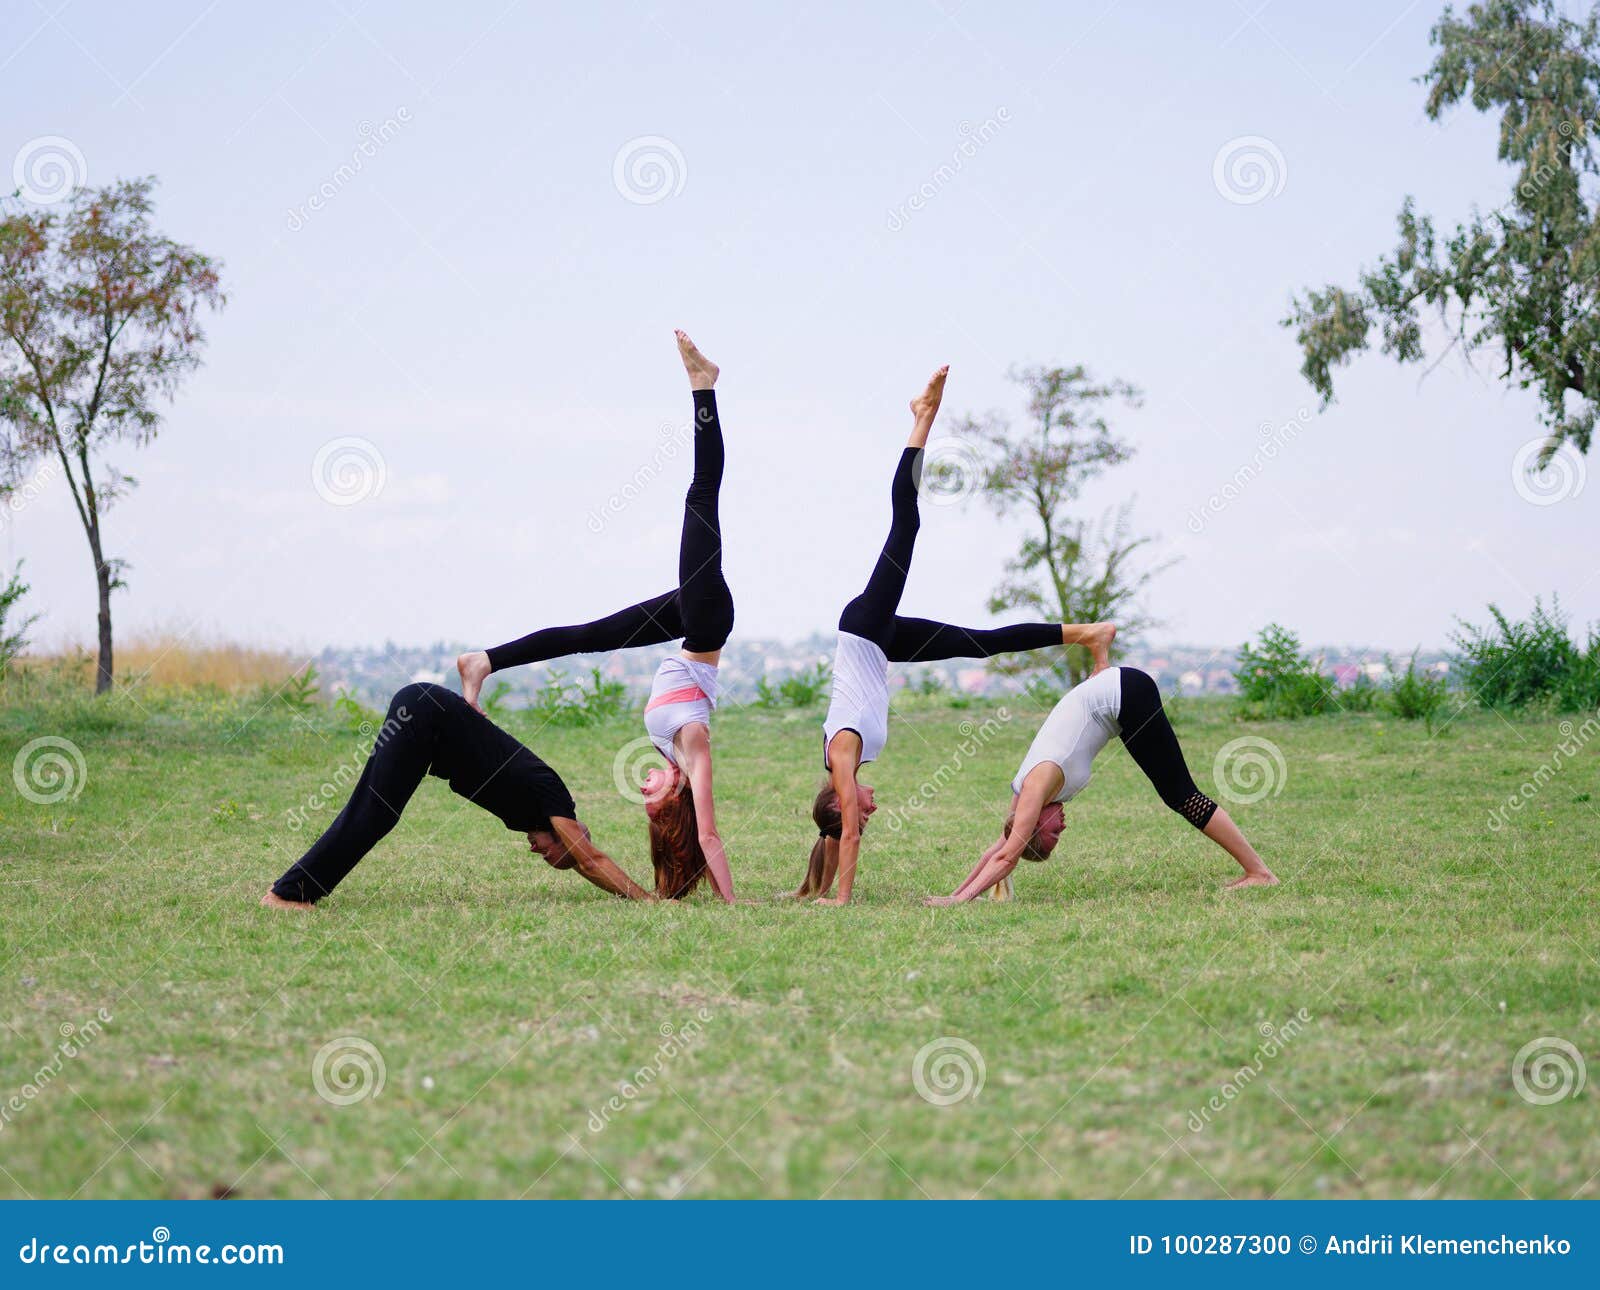 A Group of Four Holds Yoga Classes in the Park. Healthy Lifestyle